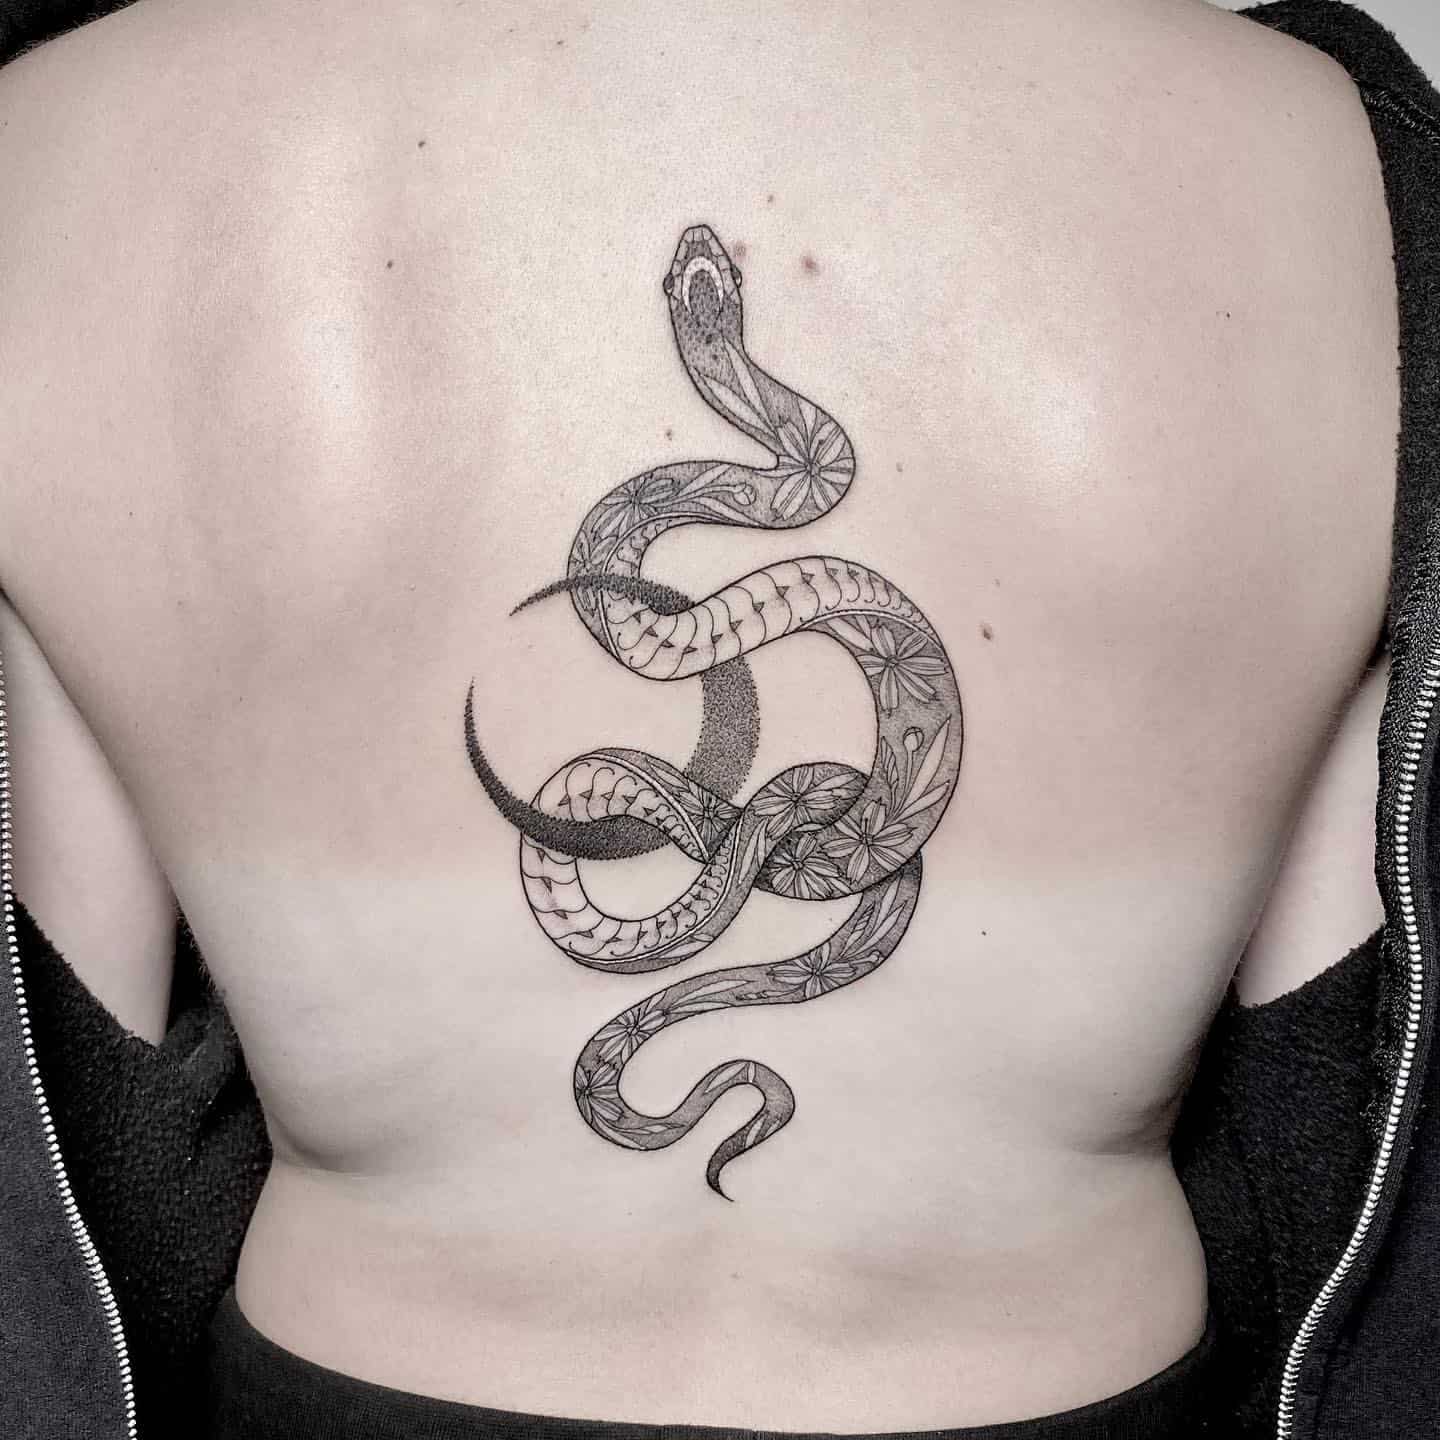 30 Awesome Spine Tattoo Ideas for Men & Women in 2023